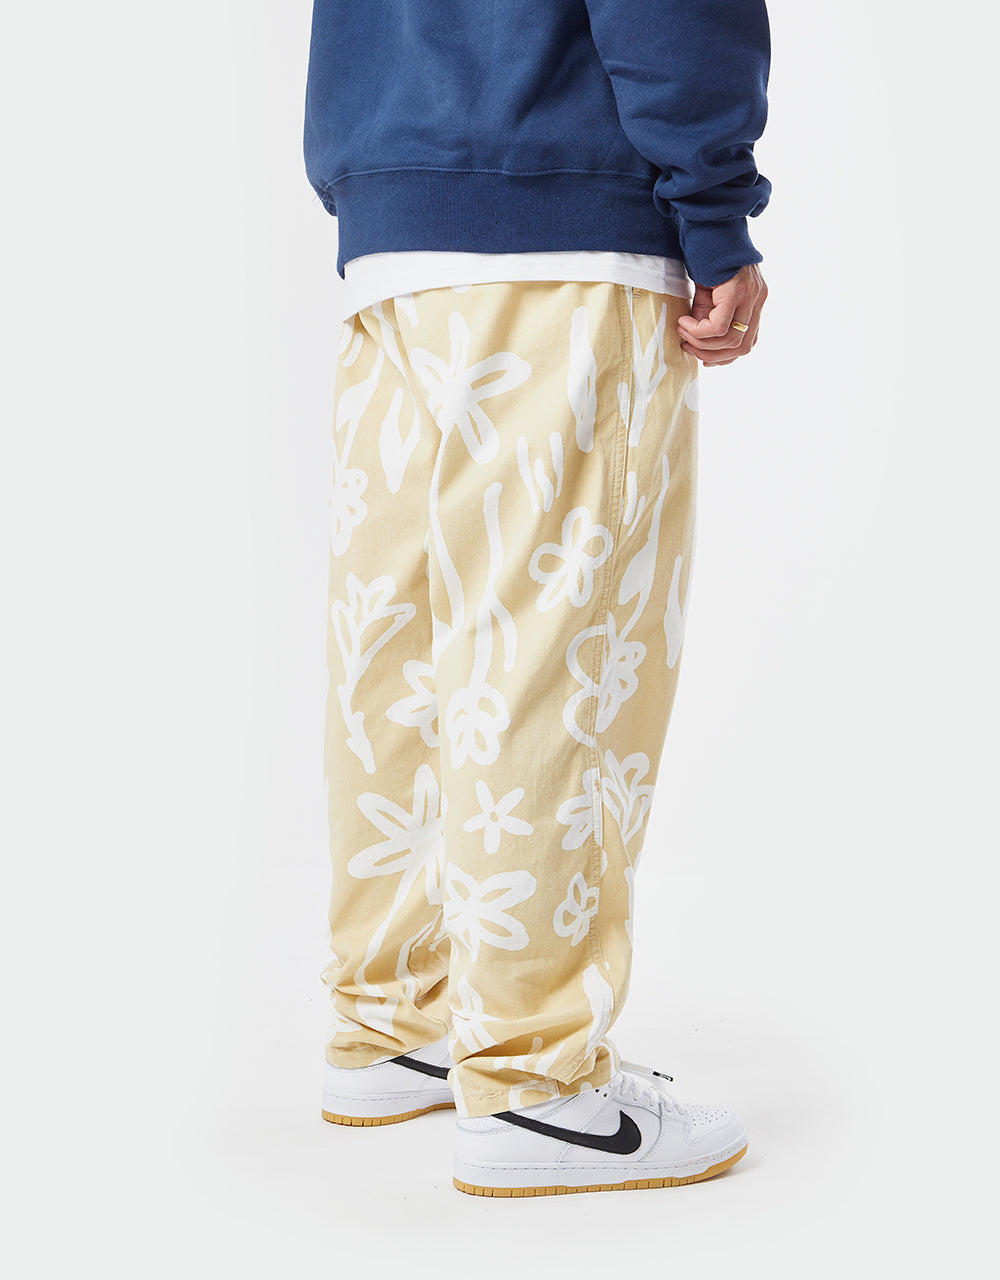 Route One Organic Baggy Pants - Wildflower Stone/White